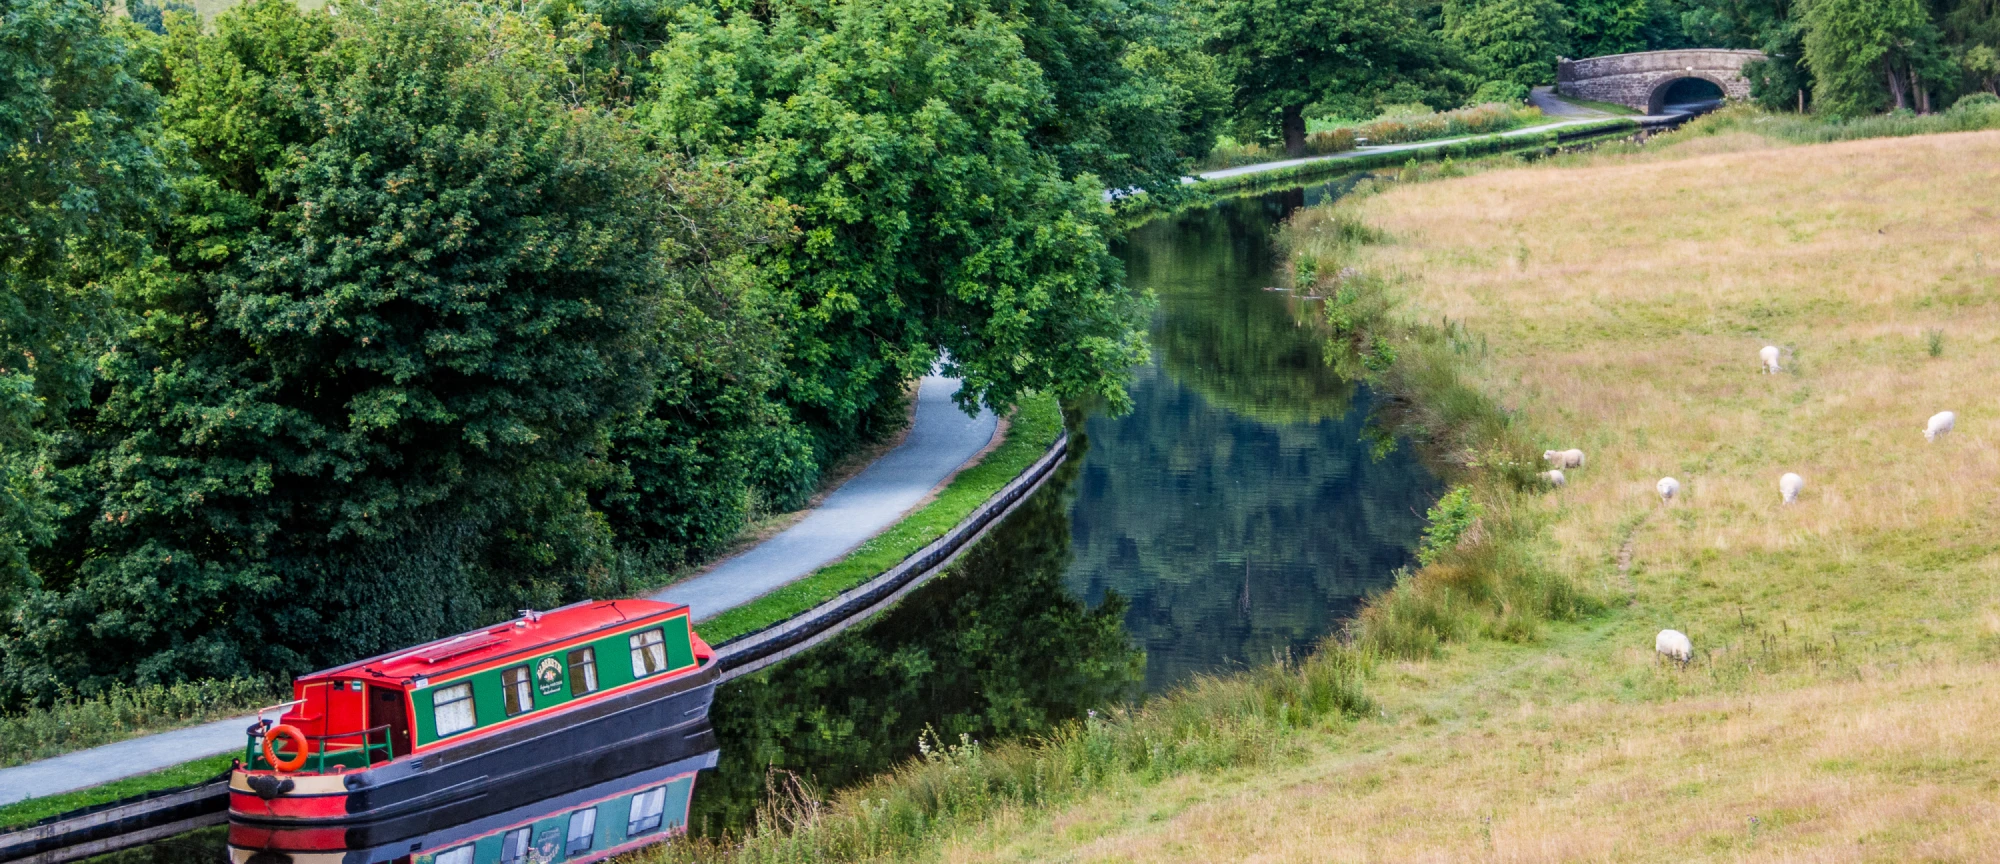 Holiday barge moored up on the Lllangollen Canal